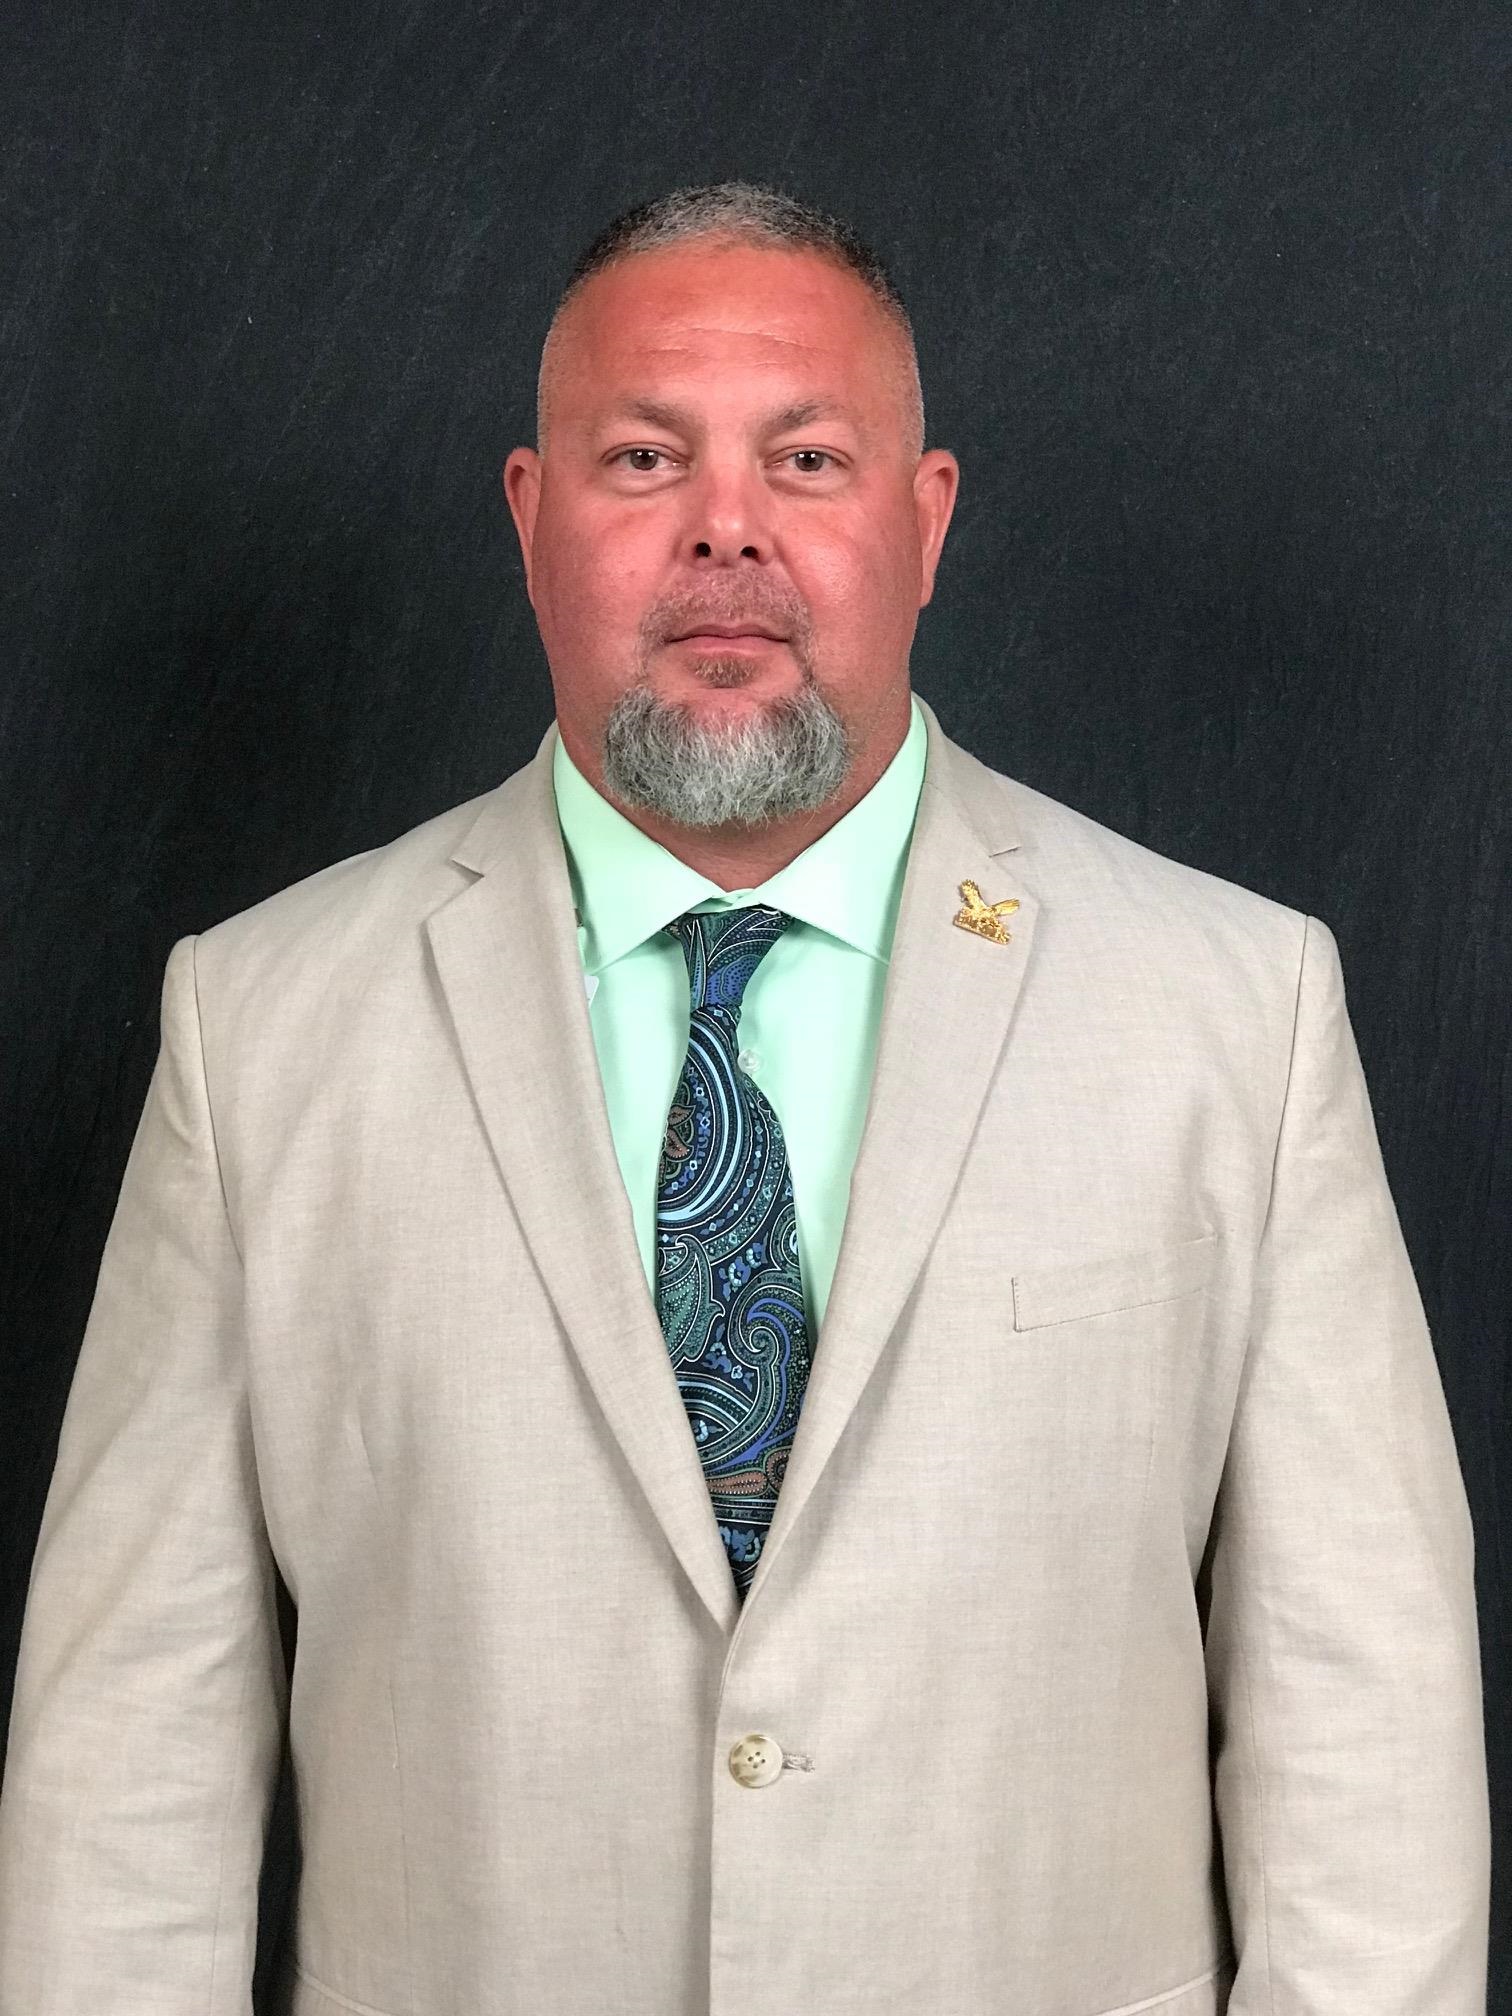 Russell Lawley, Assistant Principal